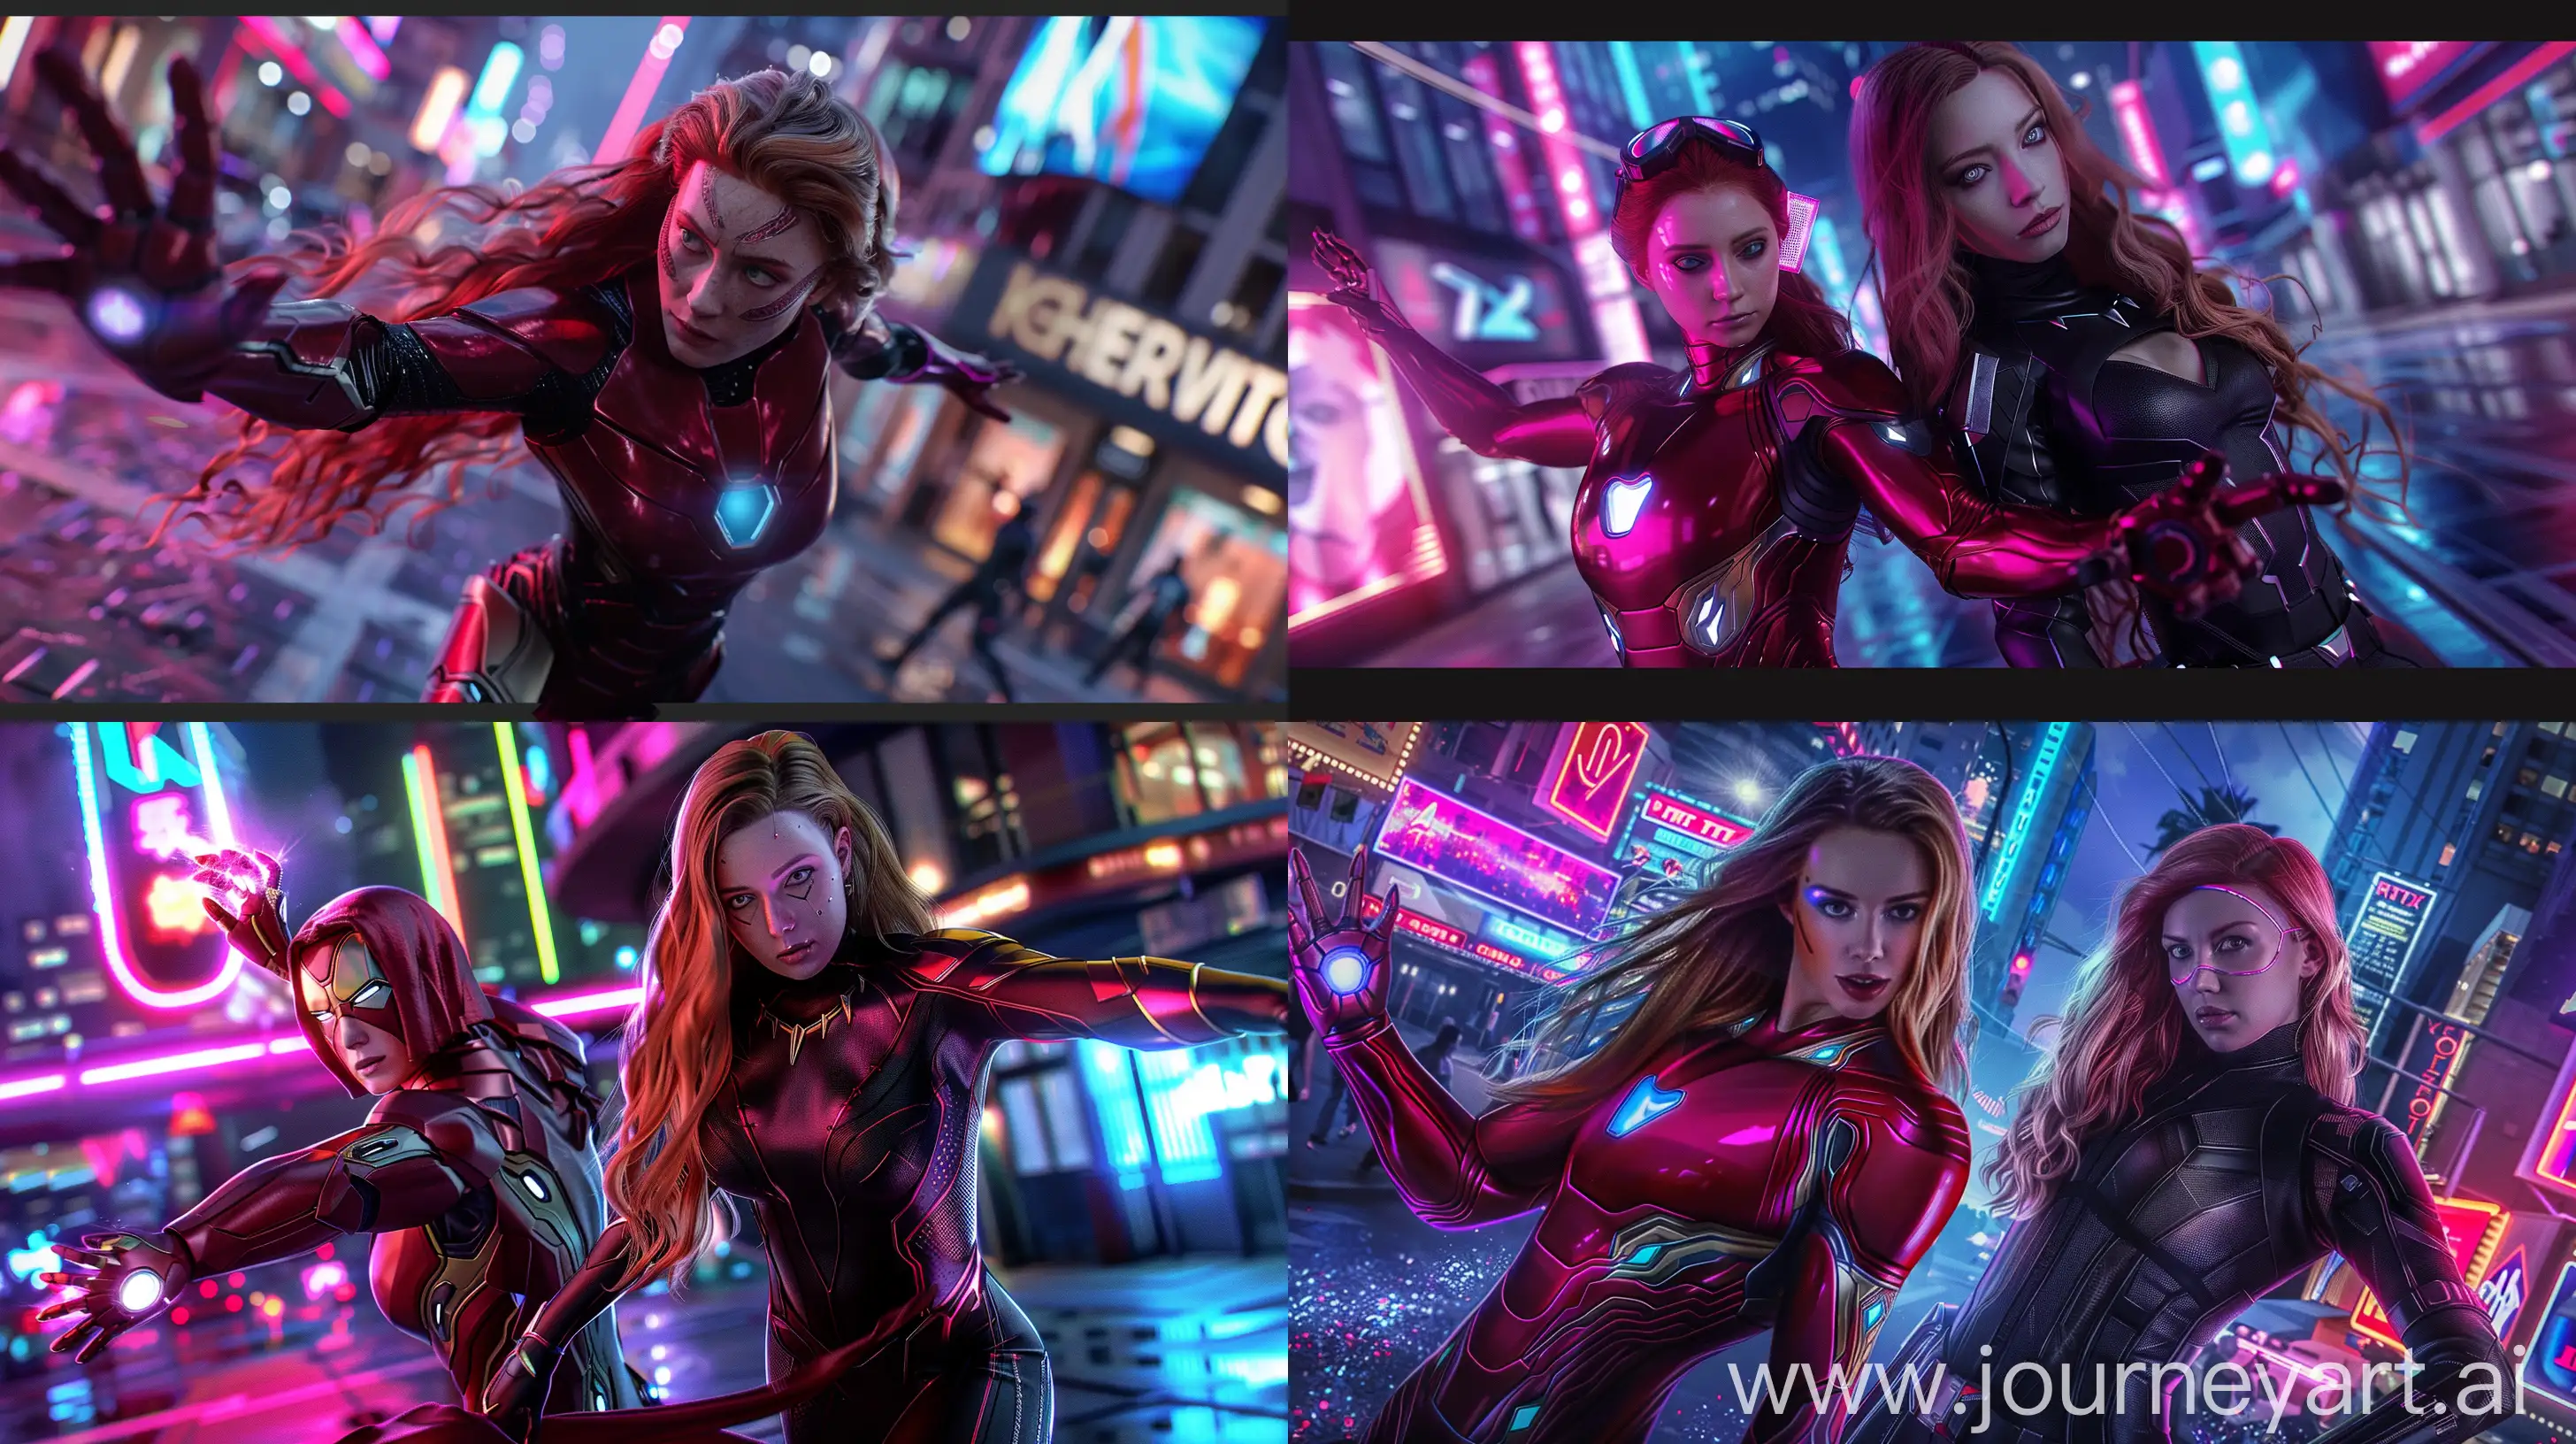 Posing Scarlet Witch Iron man mix and Black Widow black panther mix hyperrealistic rtx. A futuristic neon city at the background. --ar 16:9